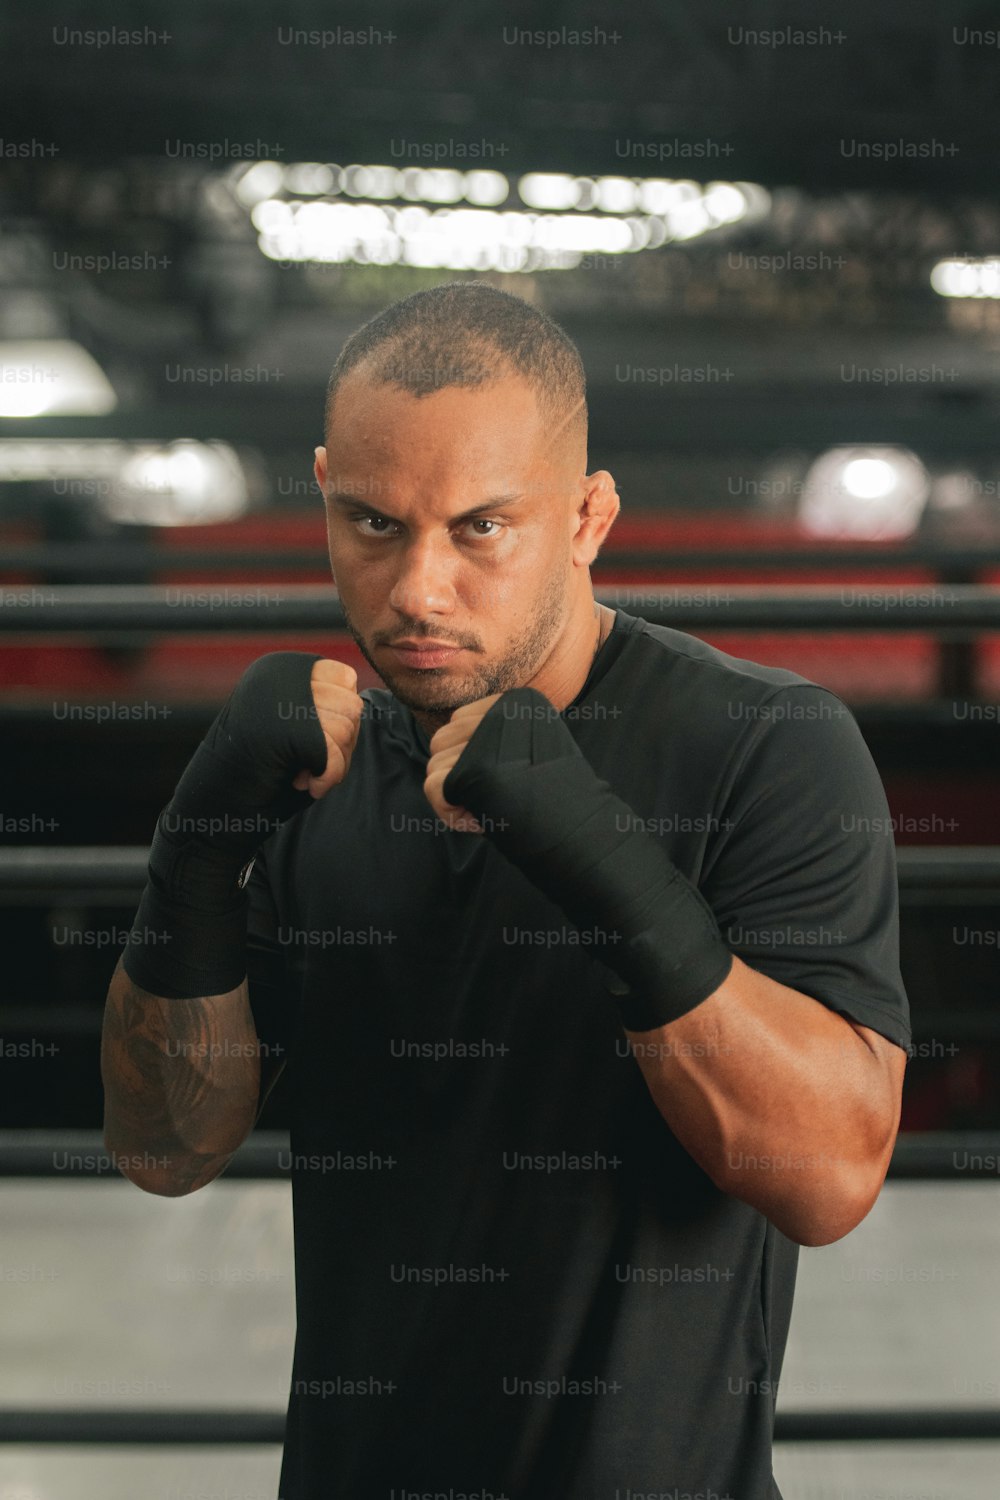 a man in a black shirt and boxing gloves